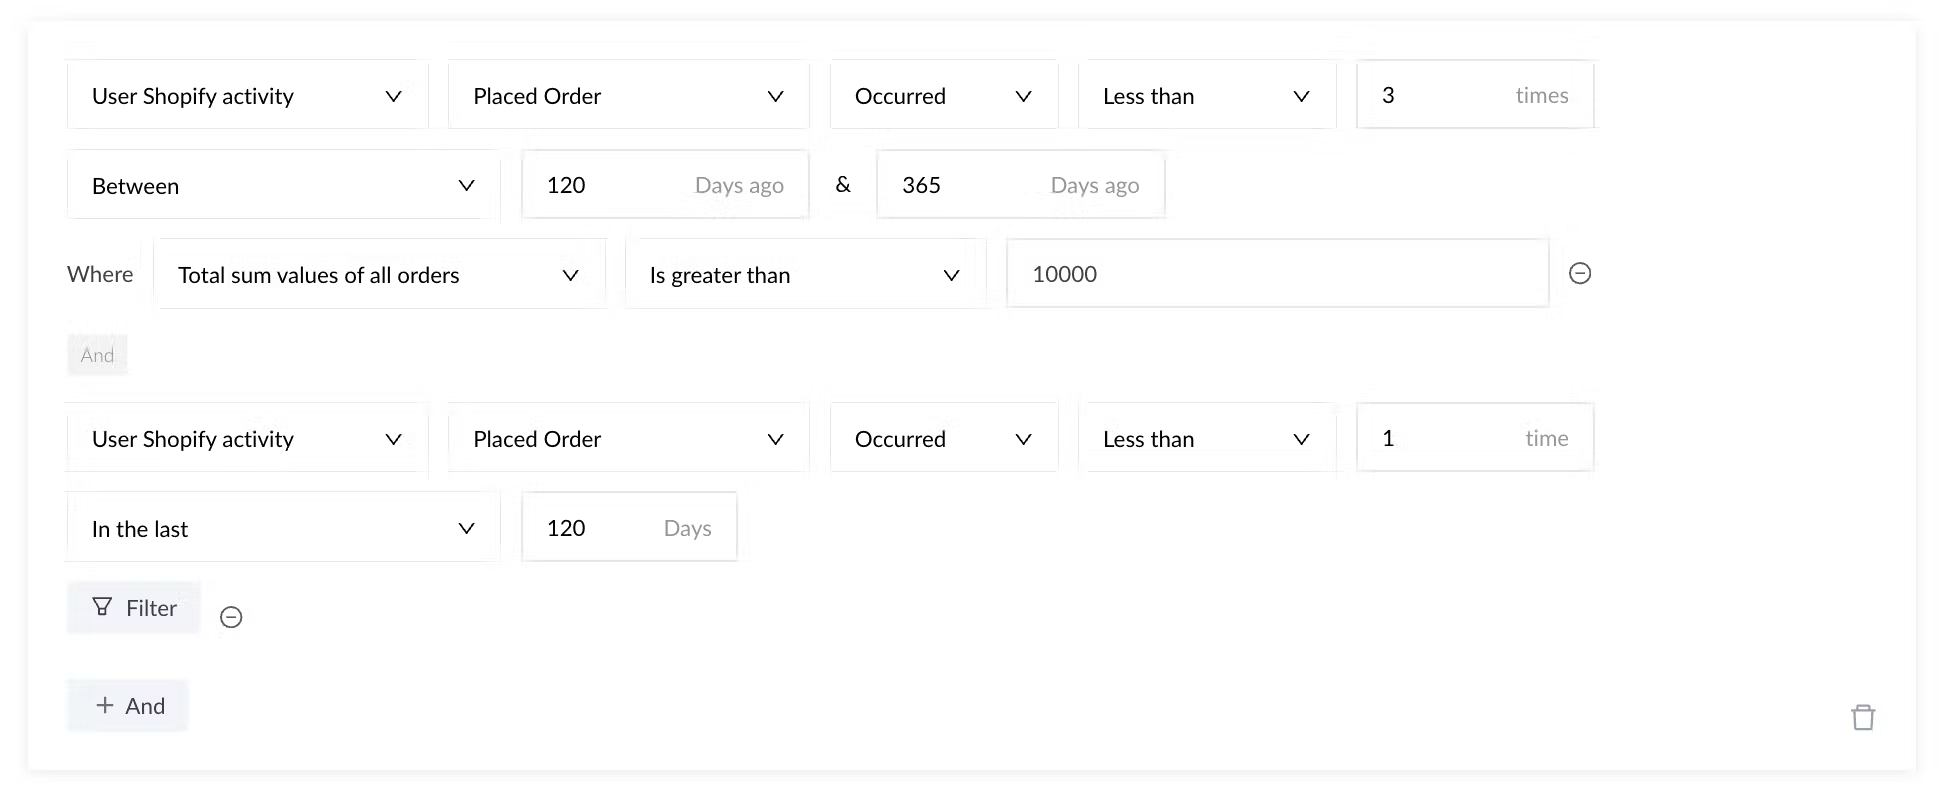 Building Customer Engagement Hierarchies in Mailmodo Based on Shopify Activity